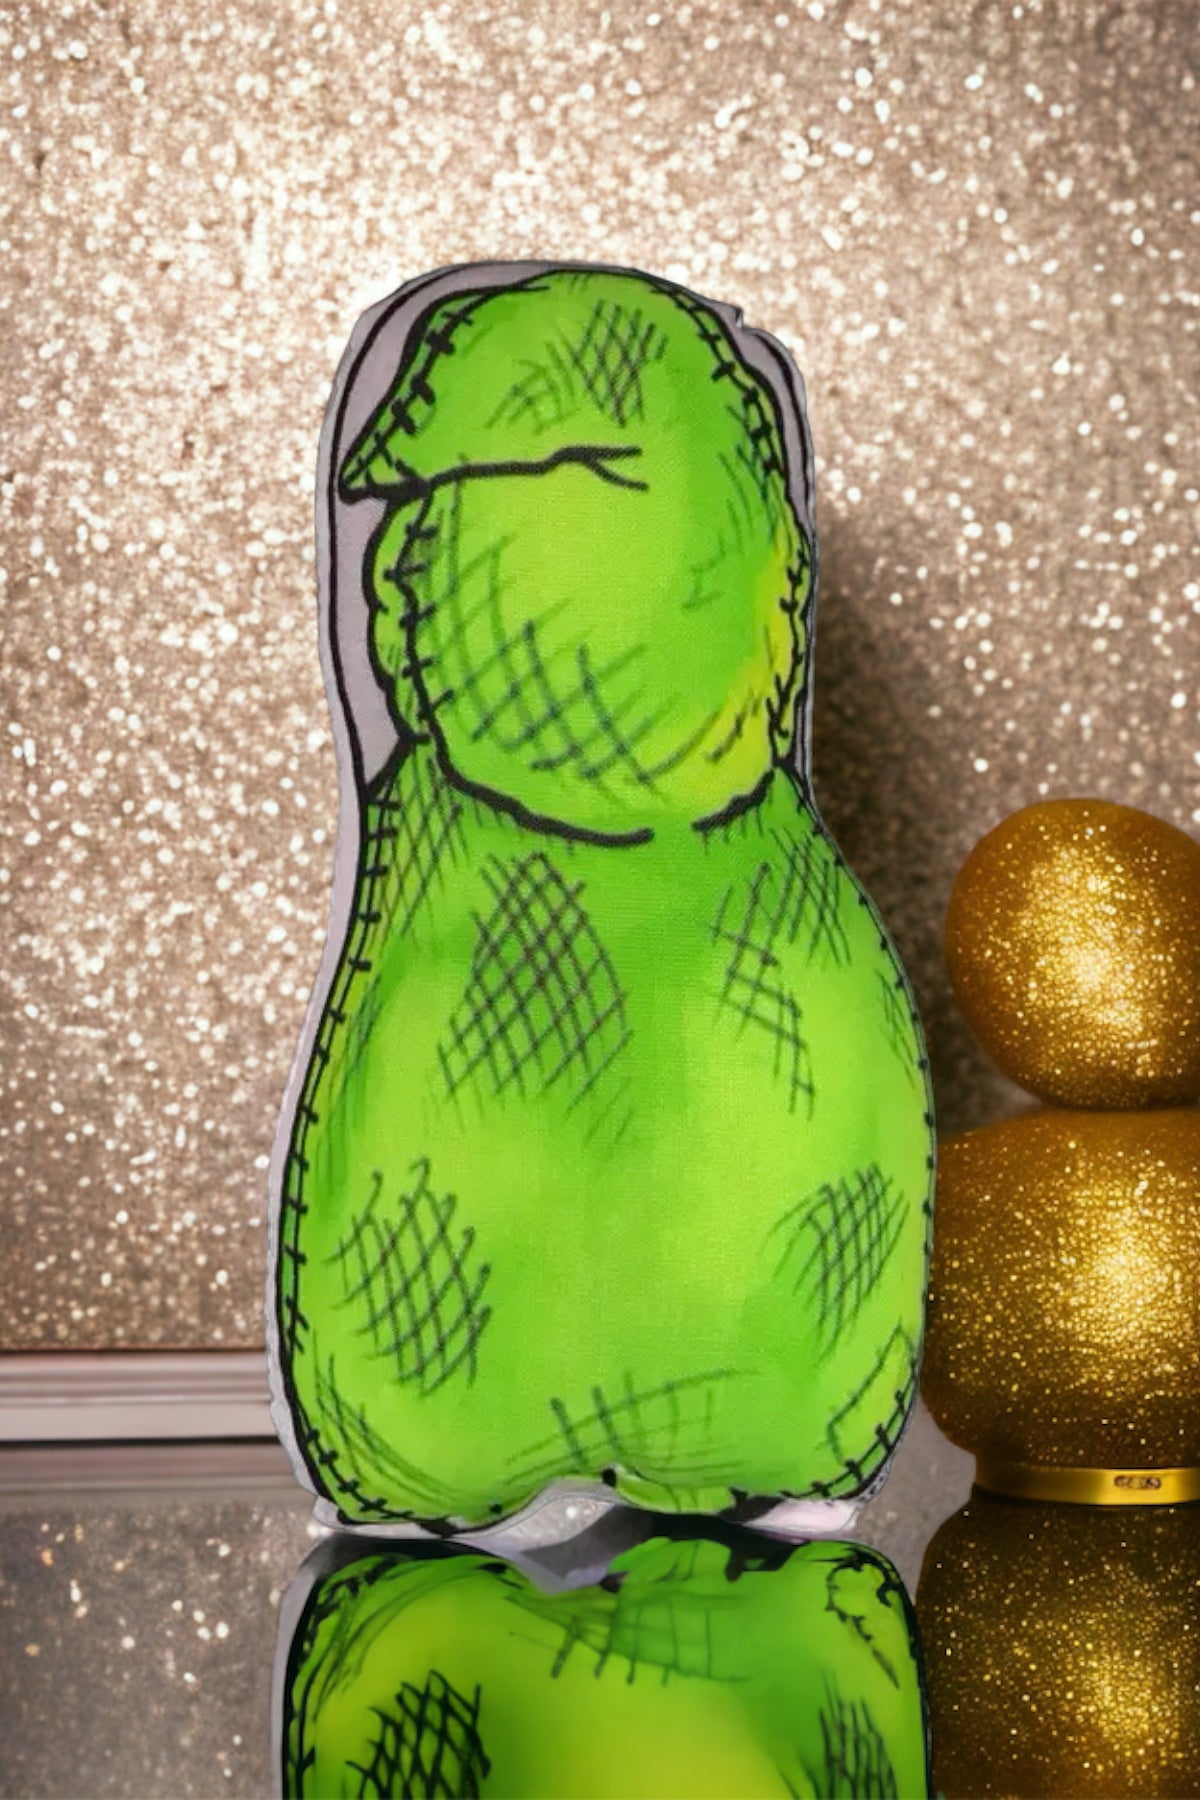 Oogie Boogie Inspired Plush Doll or Ornament : Nightmare Before Christmas